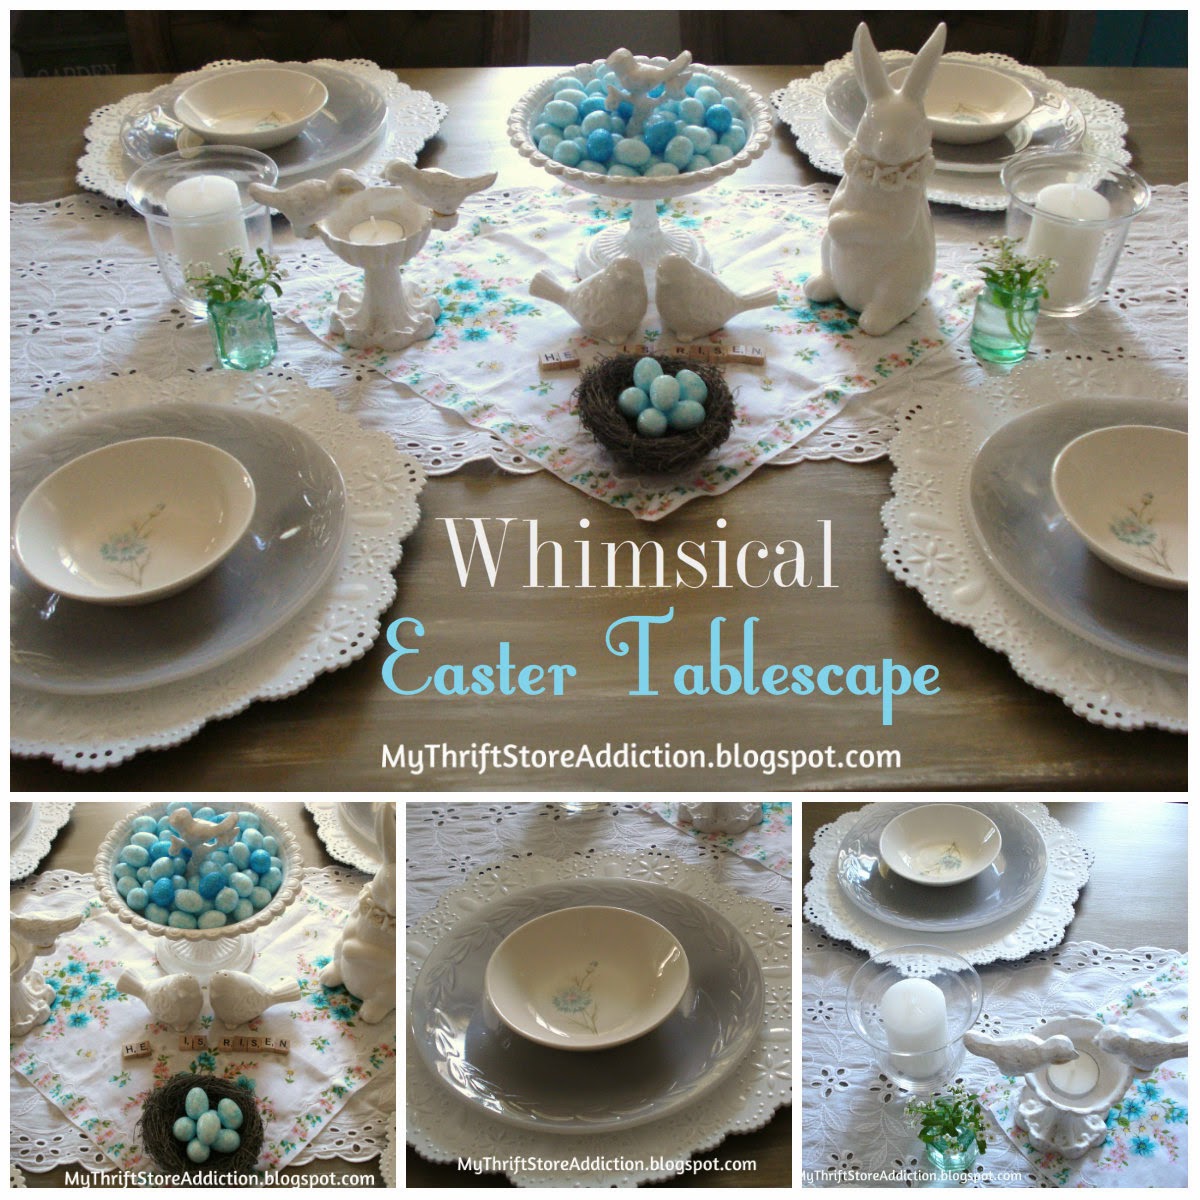 Whimsical Easter tablescape